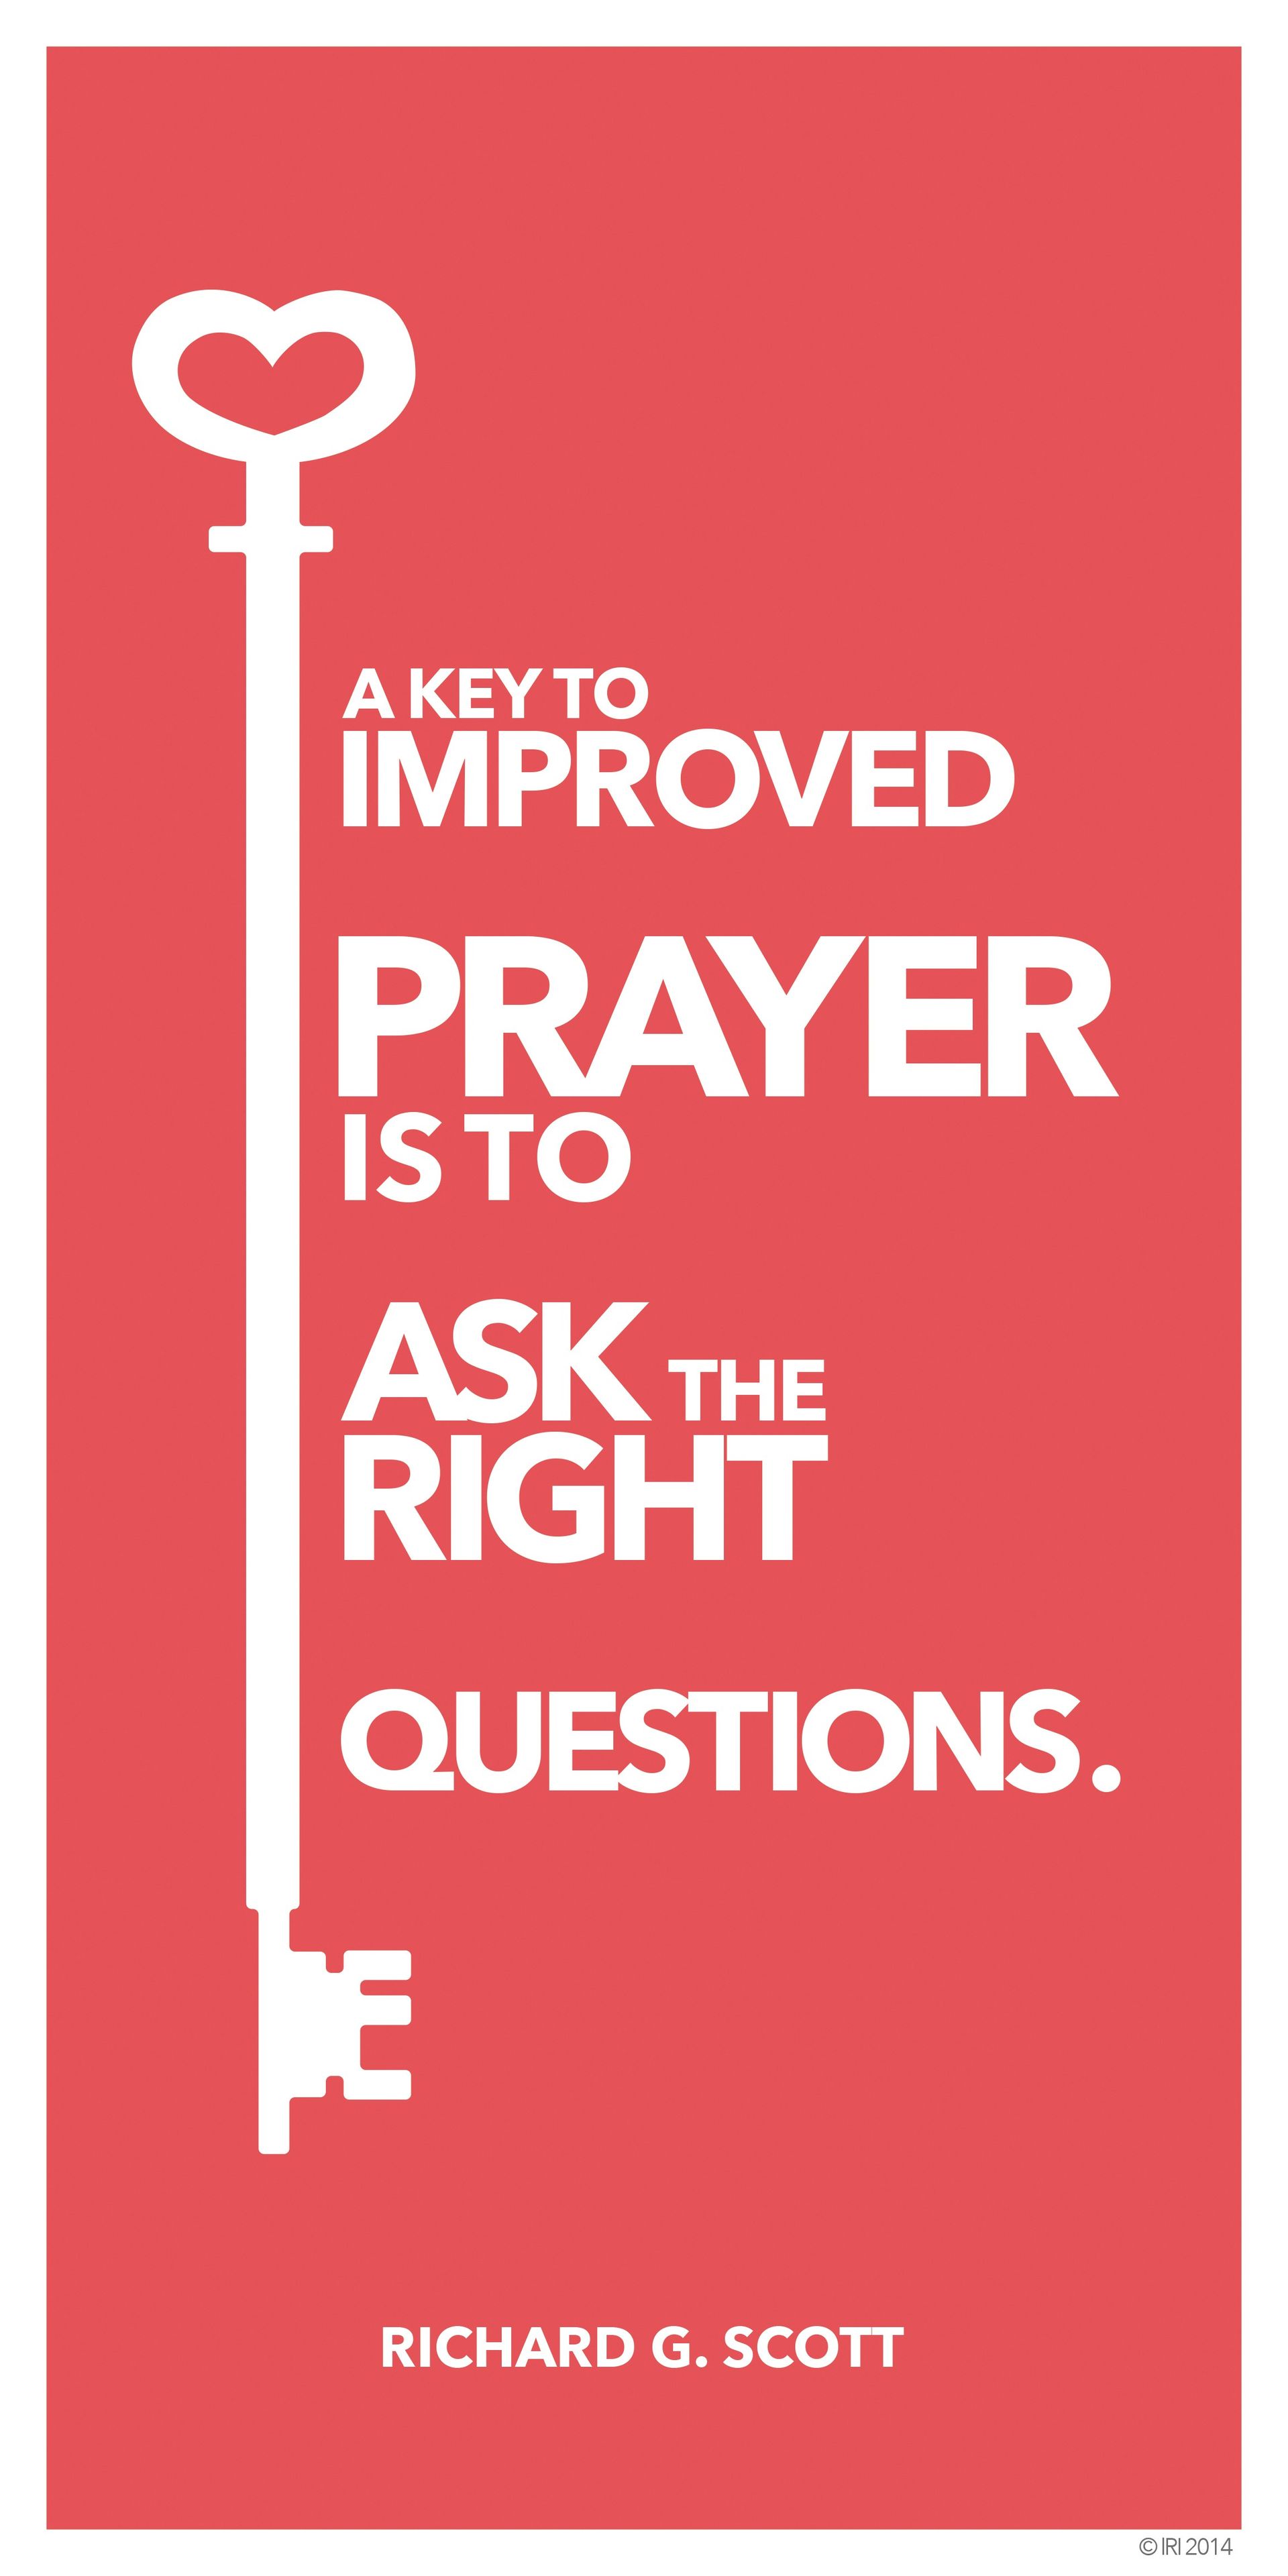 “A key to improved prayer is to ask the right questions.”—Elder Richard G. Scott, “Using the Supernal Gift of Prayer”